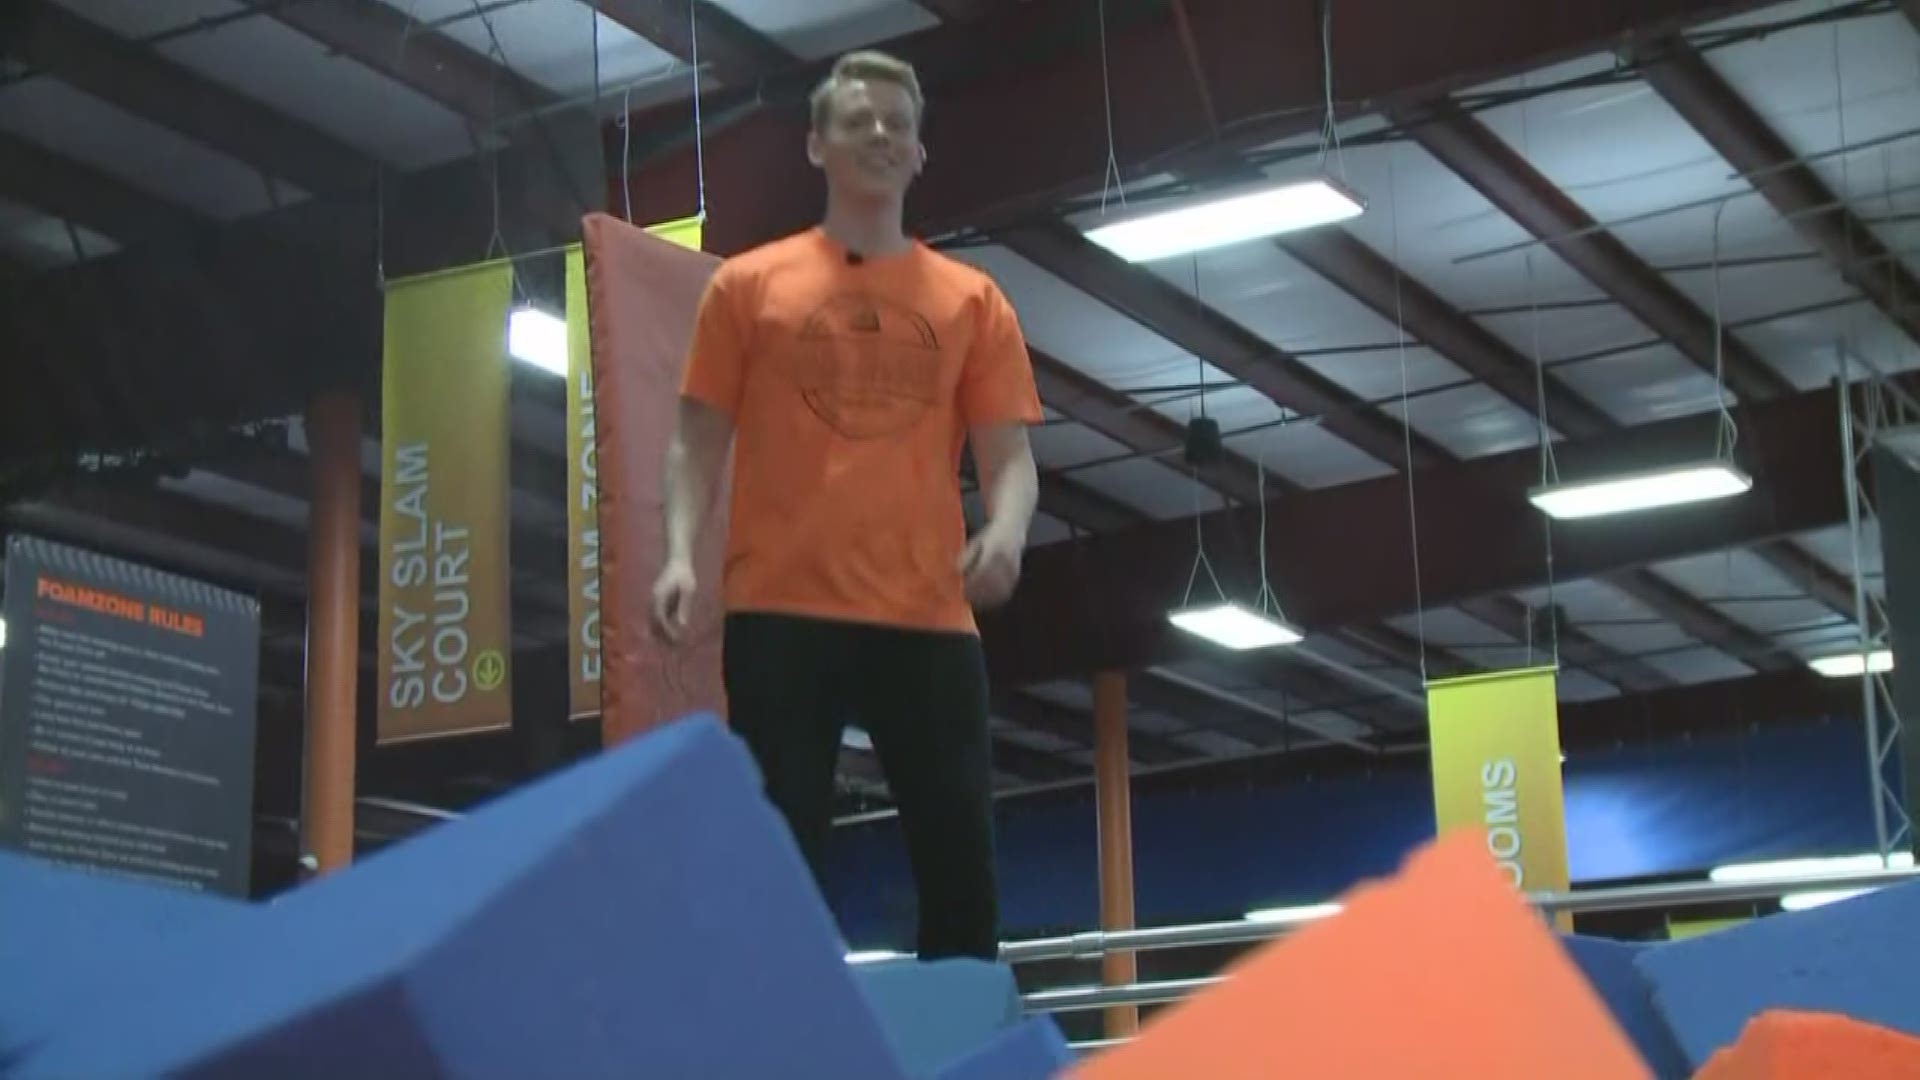 May 16, 2018: WKYC's Austin Love spent the morning jumping around at Sky Zone.